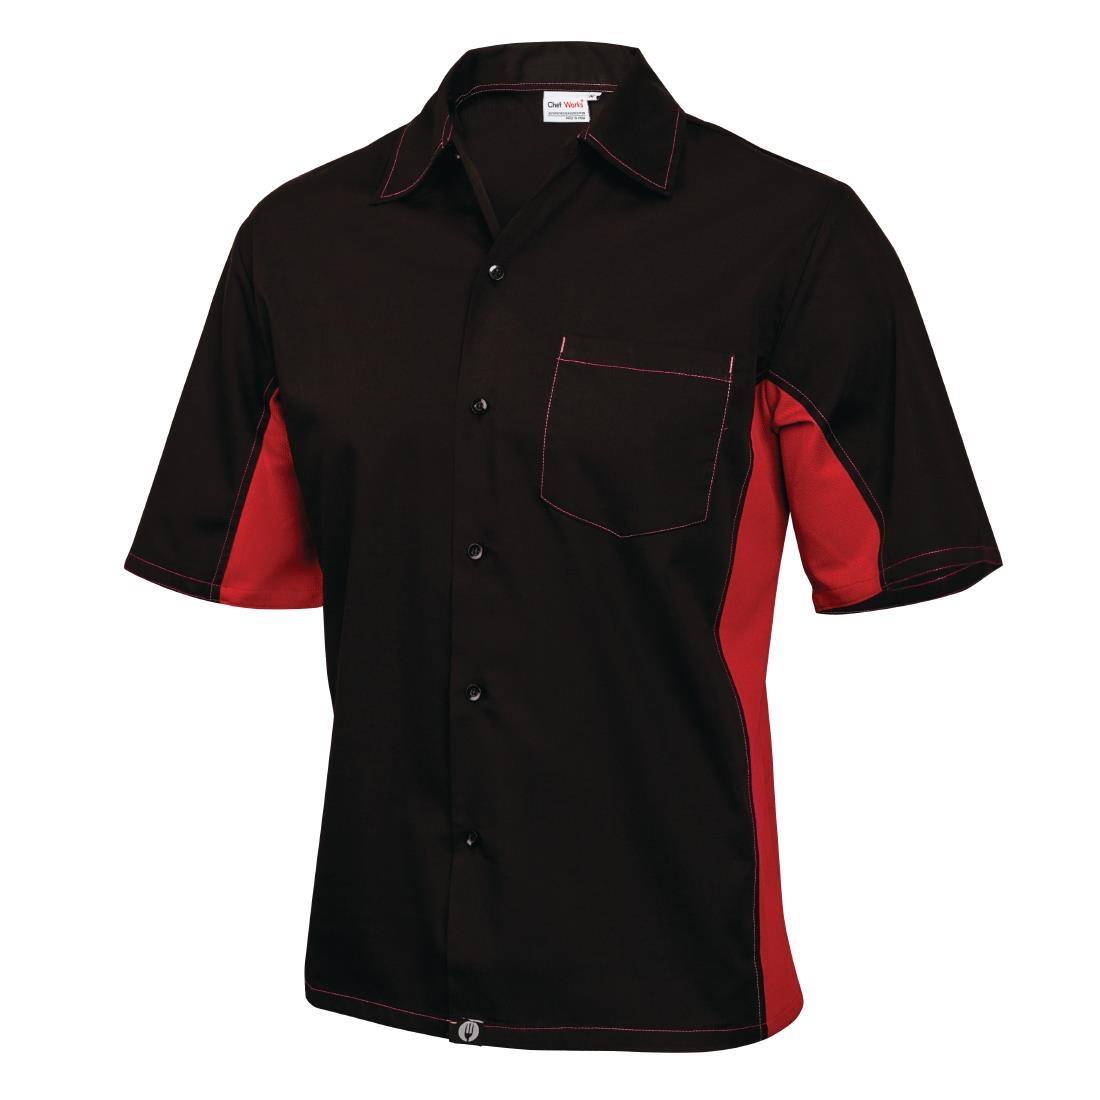 Chef Works Unisex Contrast Shirt Black and Red S - A952-S  - 2